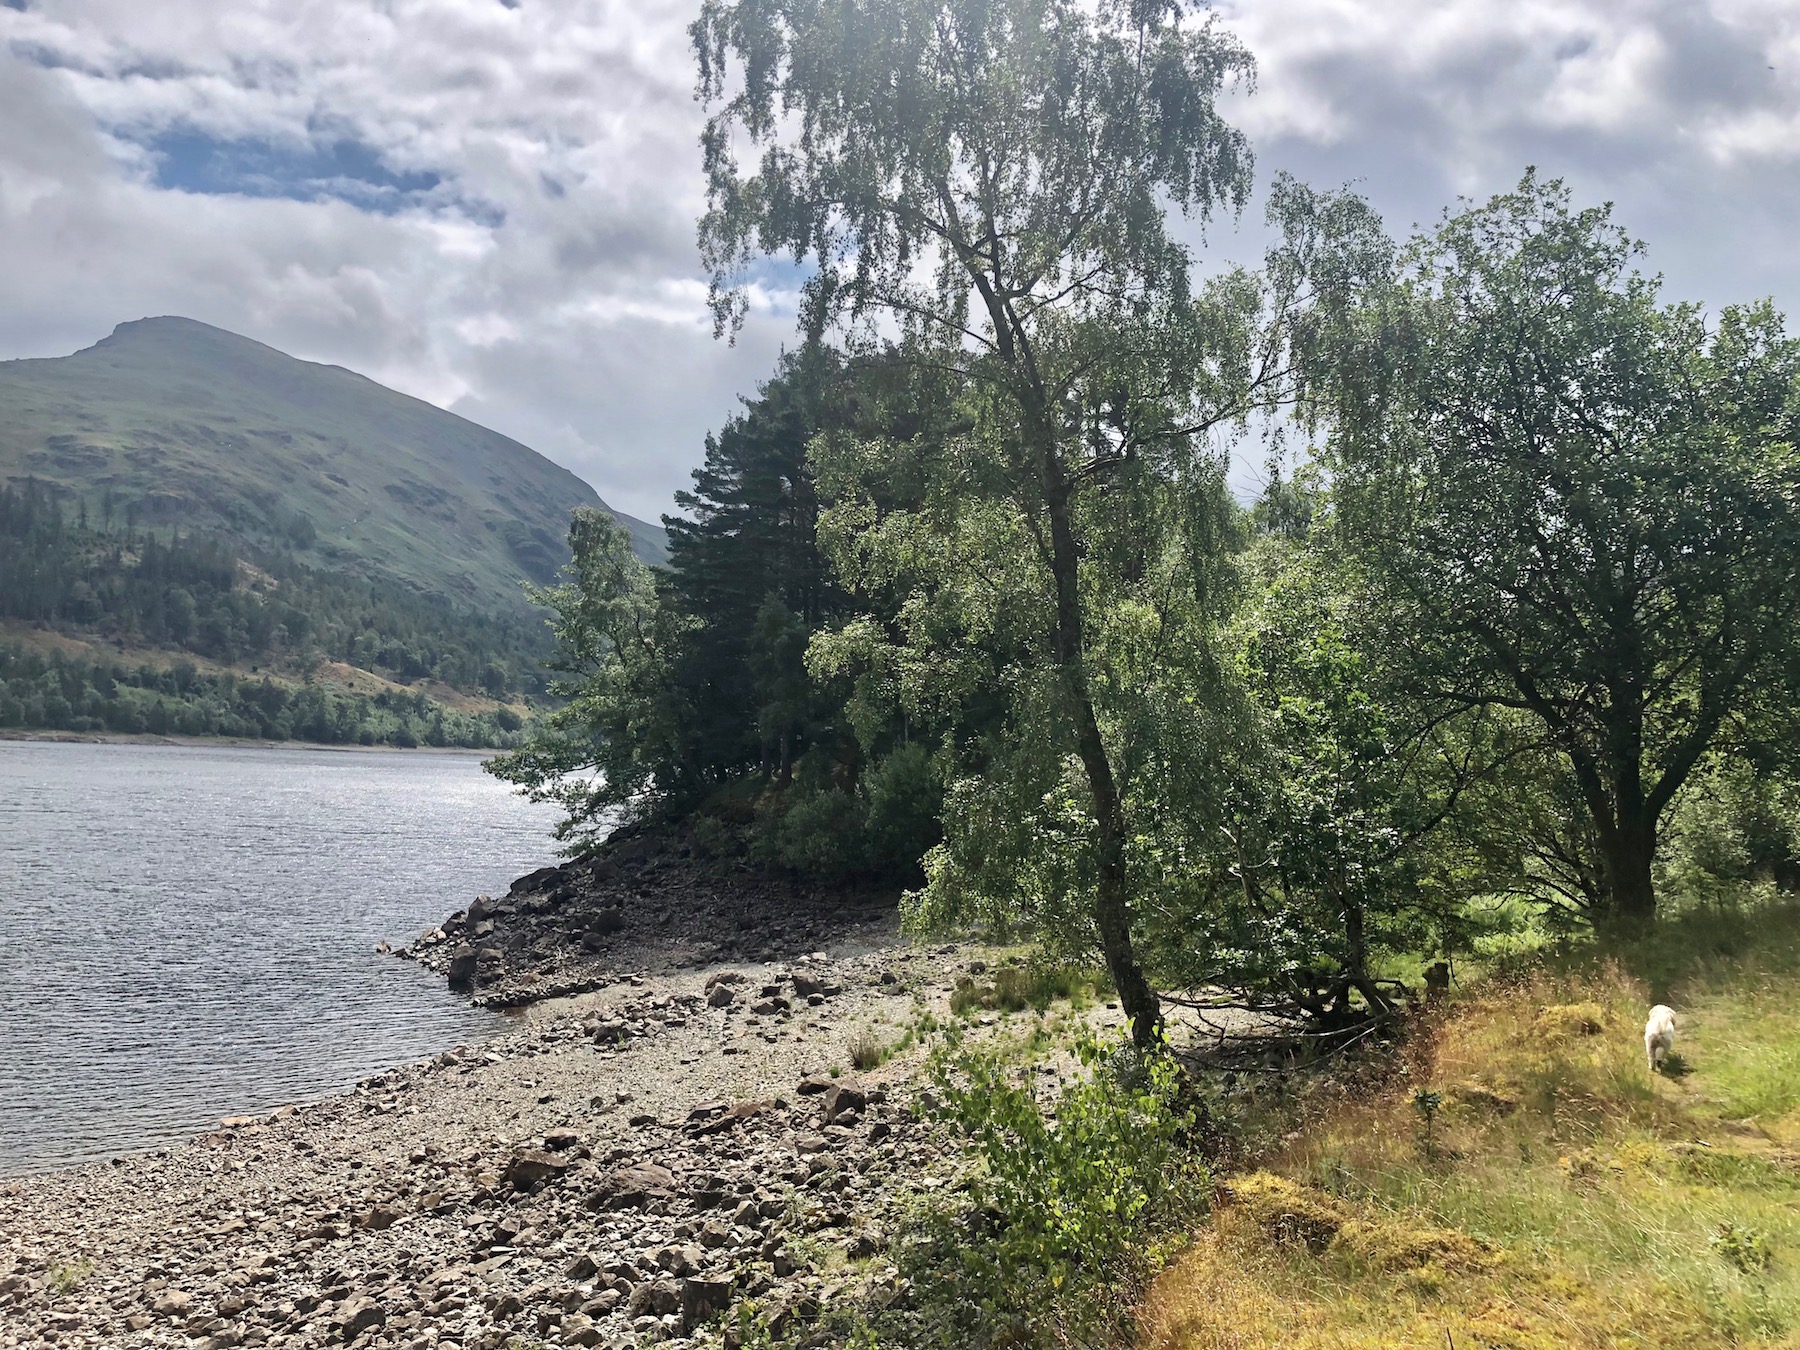 Thirlmere and Harrop Tarn Walk route and directions